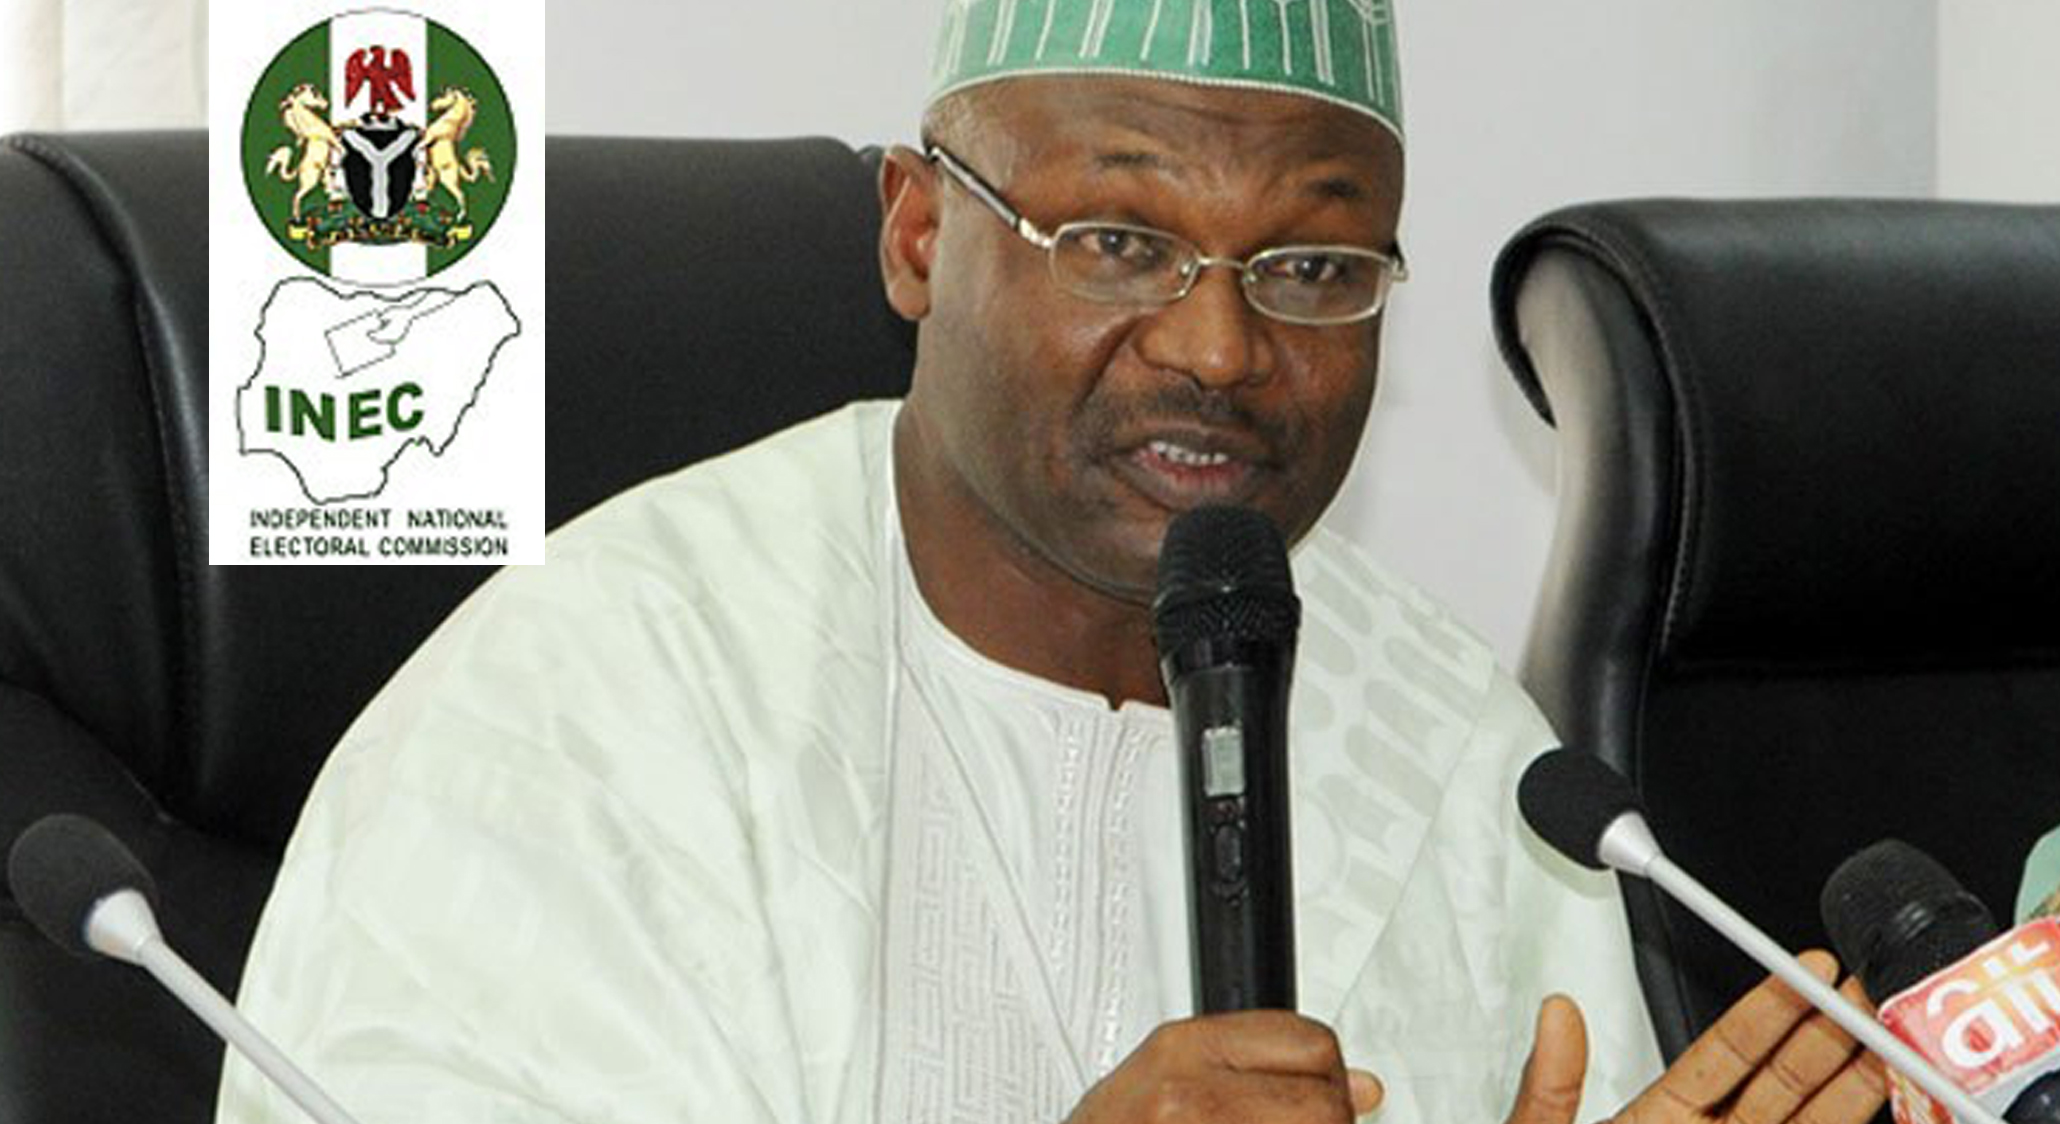 PDP Declared Winner of Zamfara State Elections By INEC